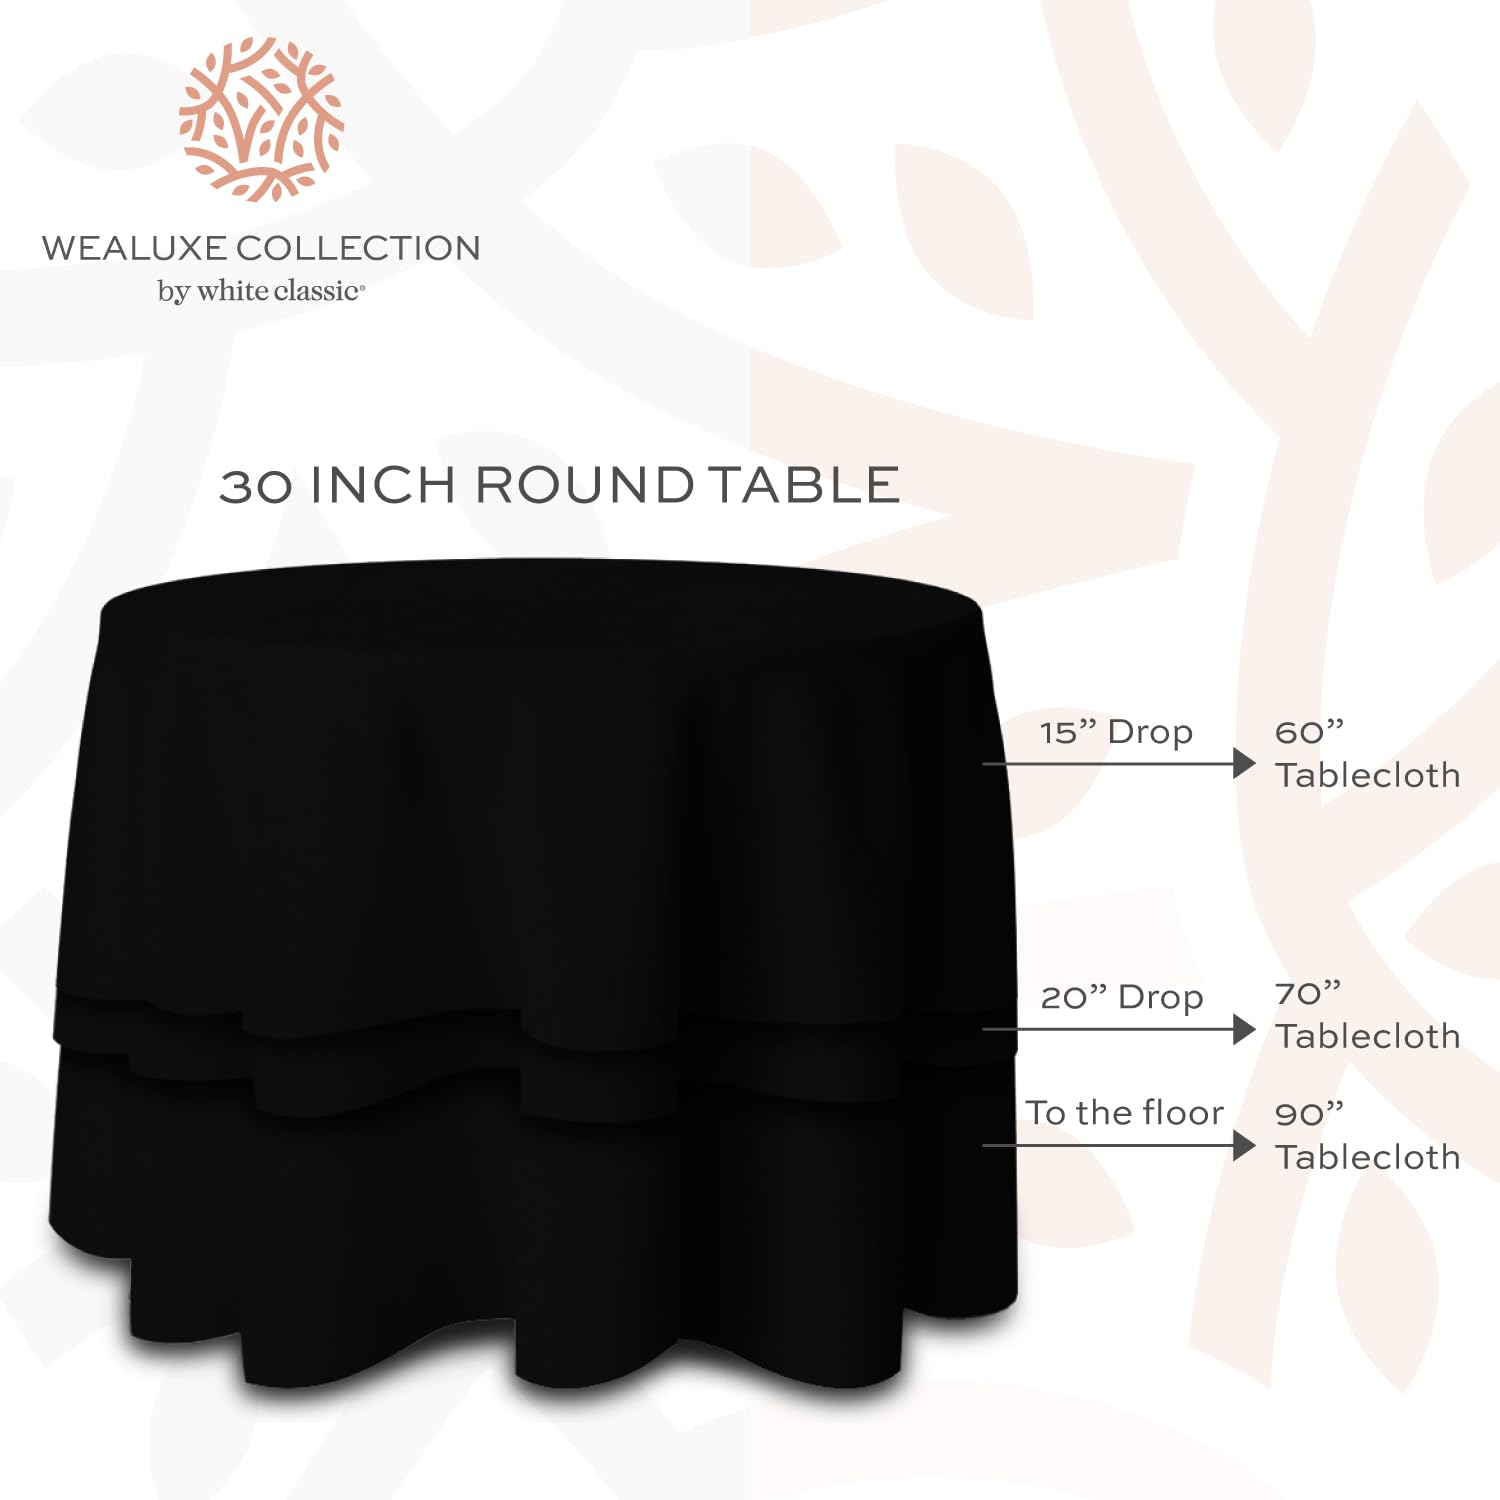 [2 Pack] 60" Round Premium Tablecloths for Wedding | Banquet | Restaurant | Washable Fabric Table Cloth  - Like New